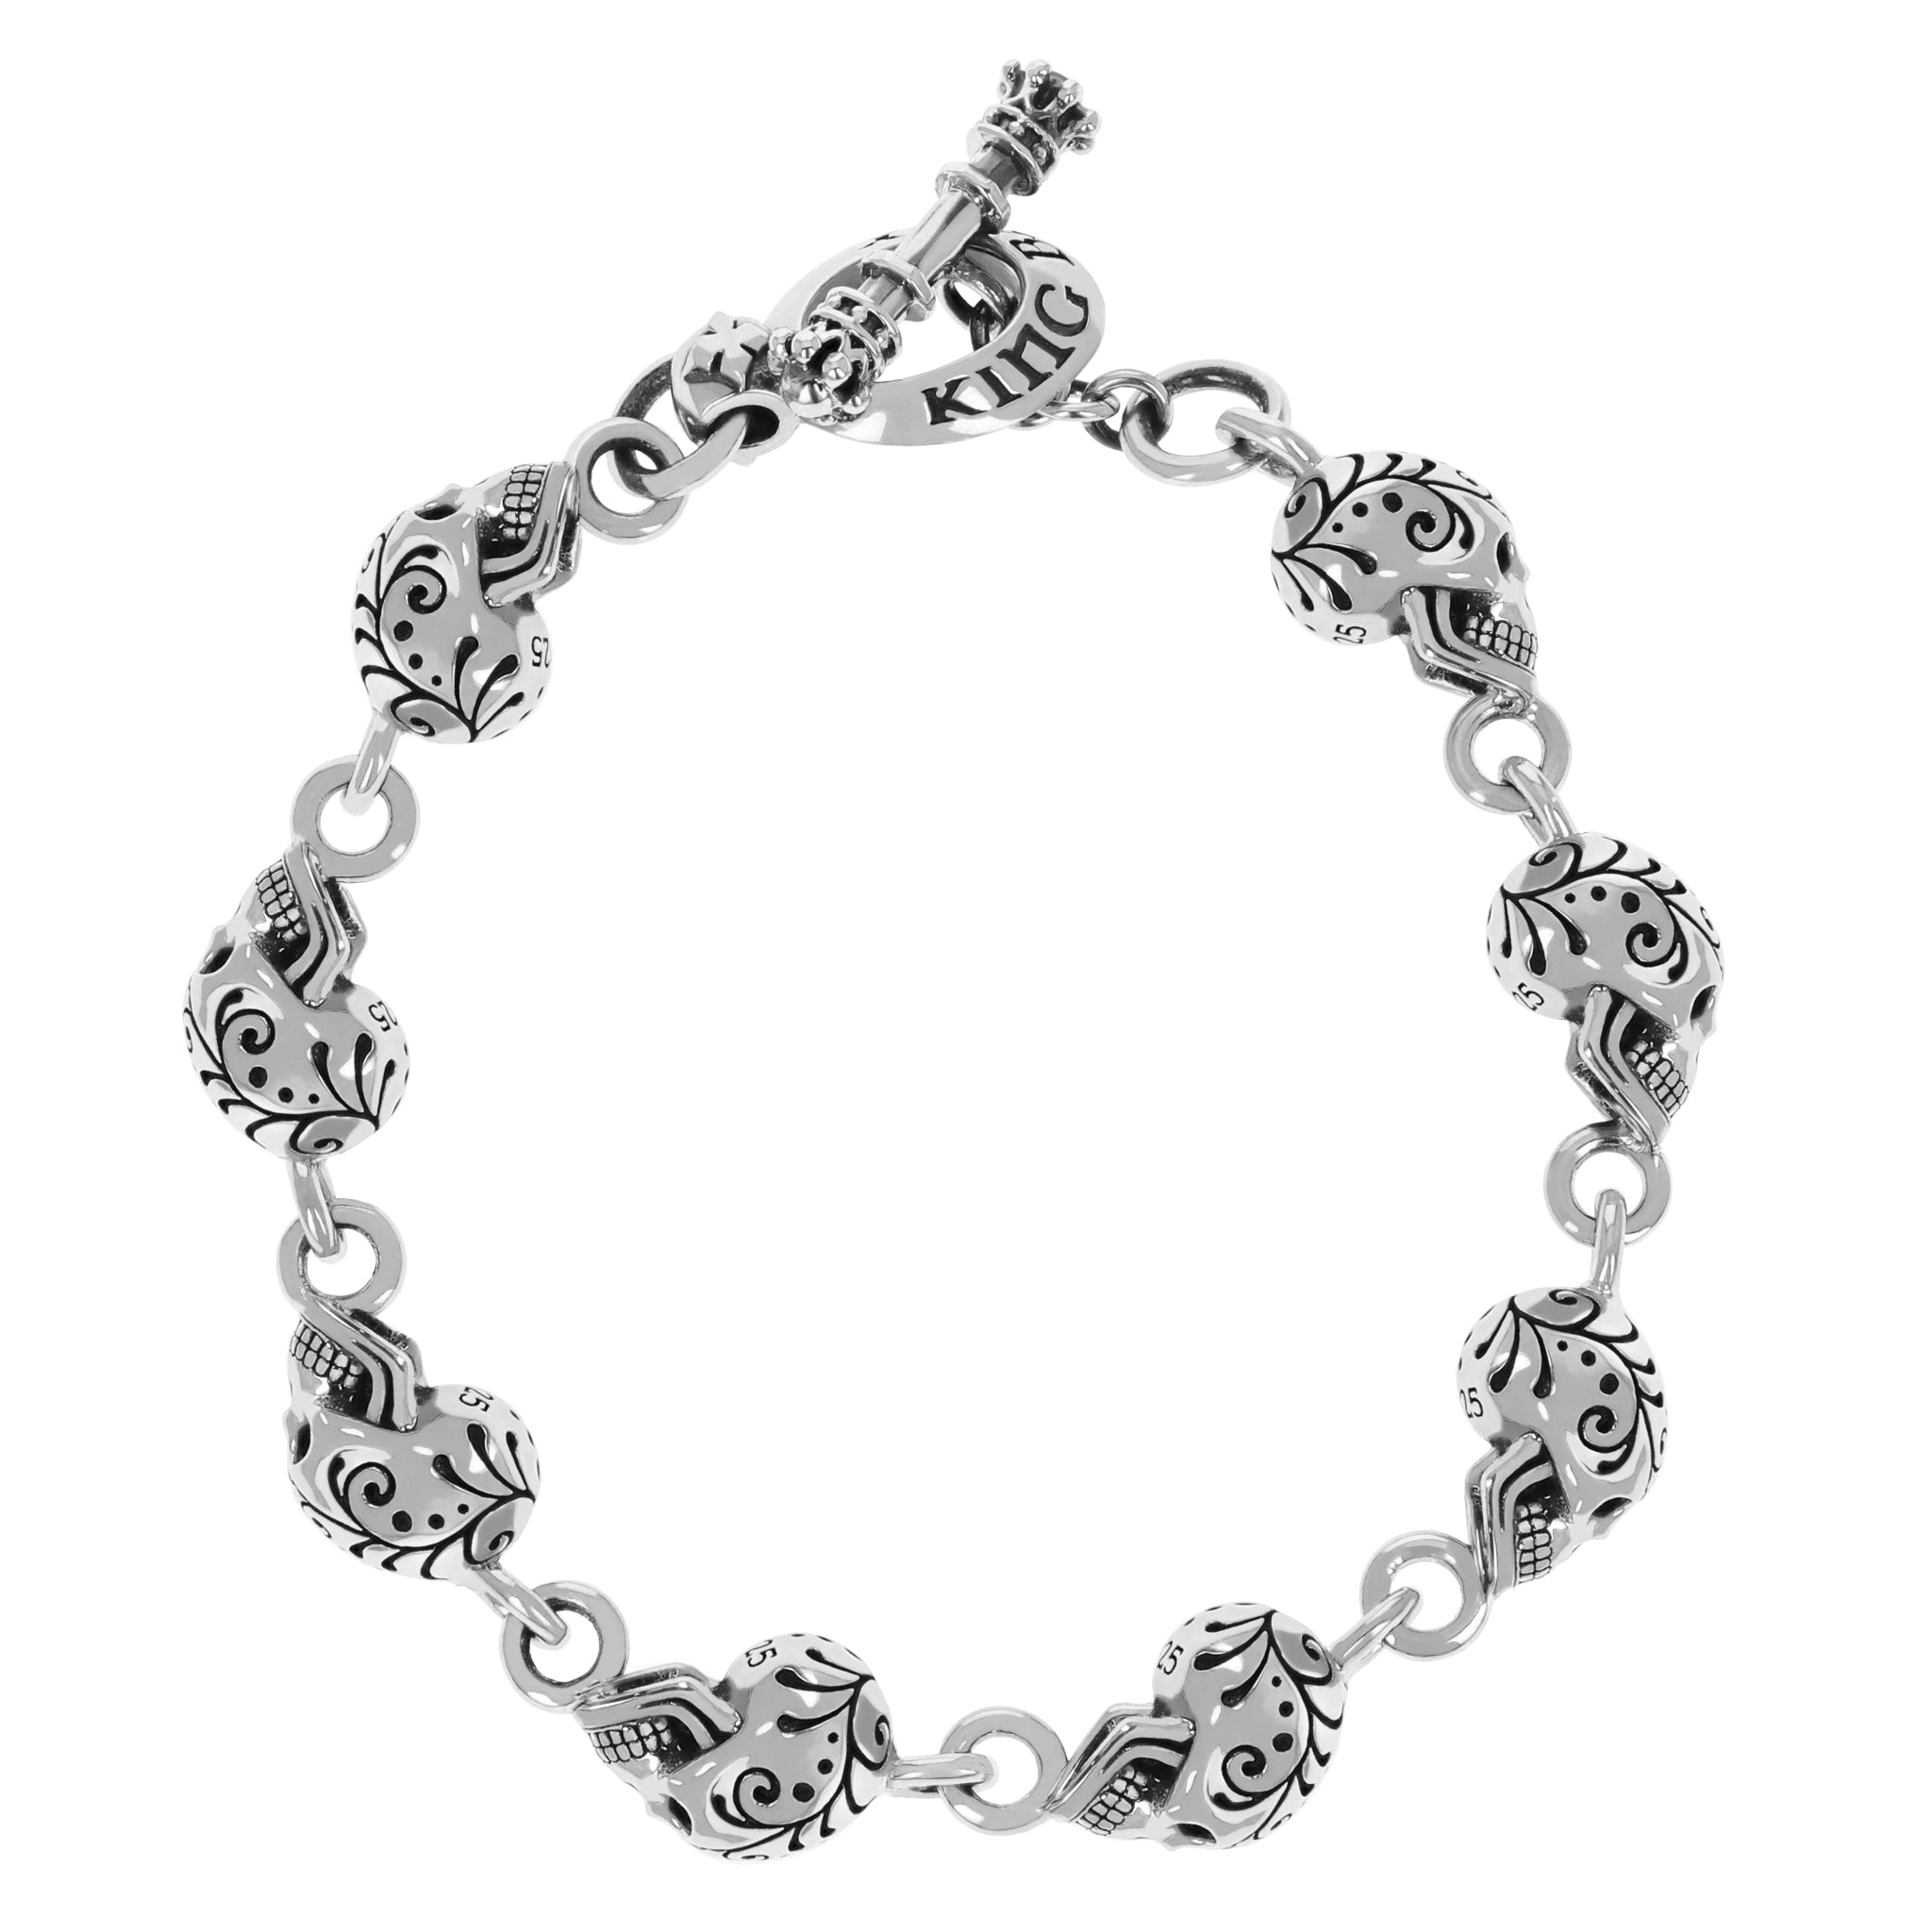 KING BABY Rose Chainmail Bracelet .925 Sterling Silver (K40-5578) Size-S  (NEW) | eBay